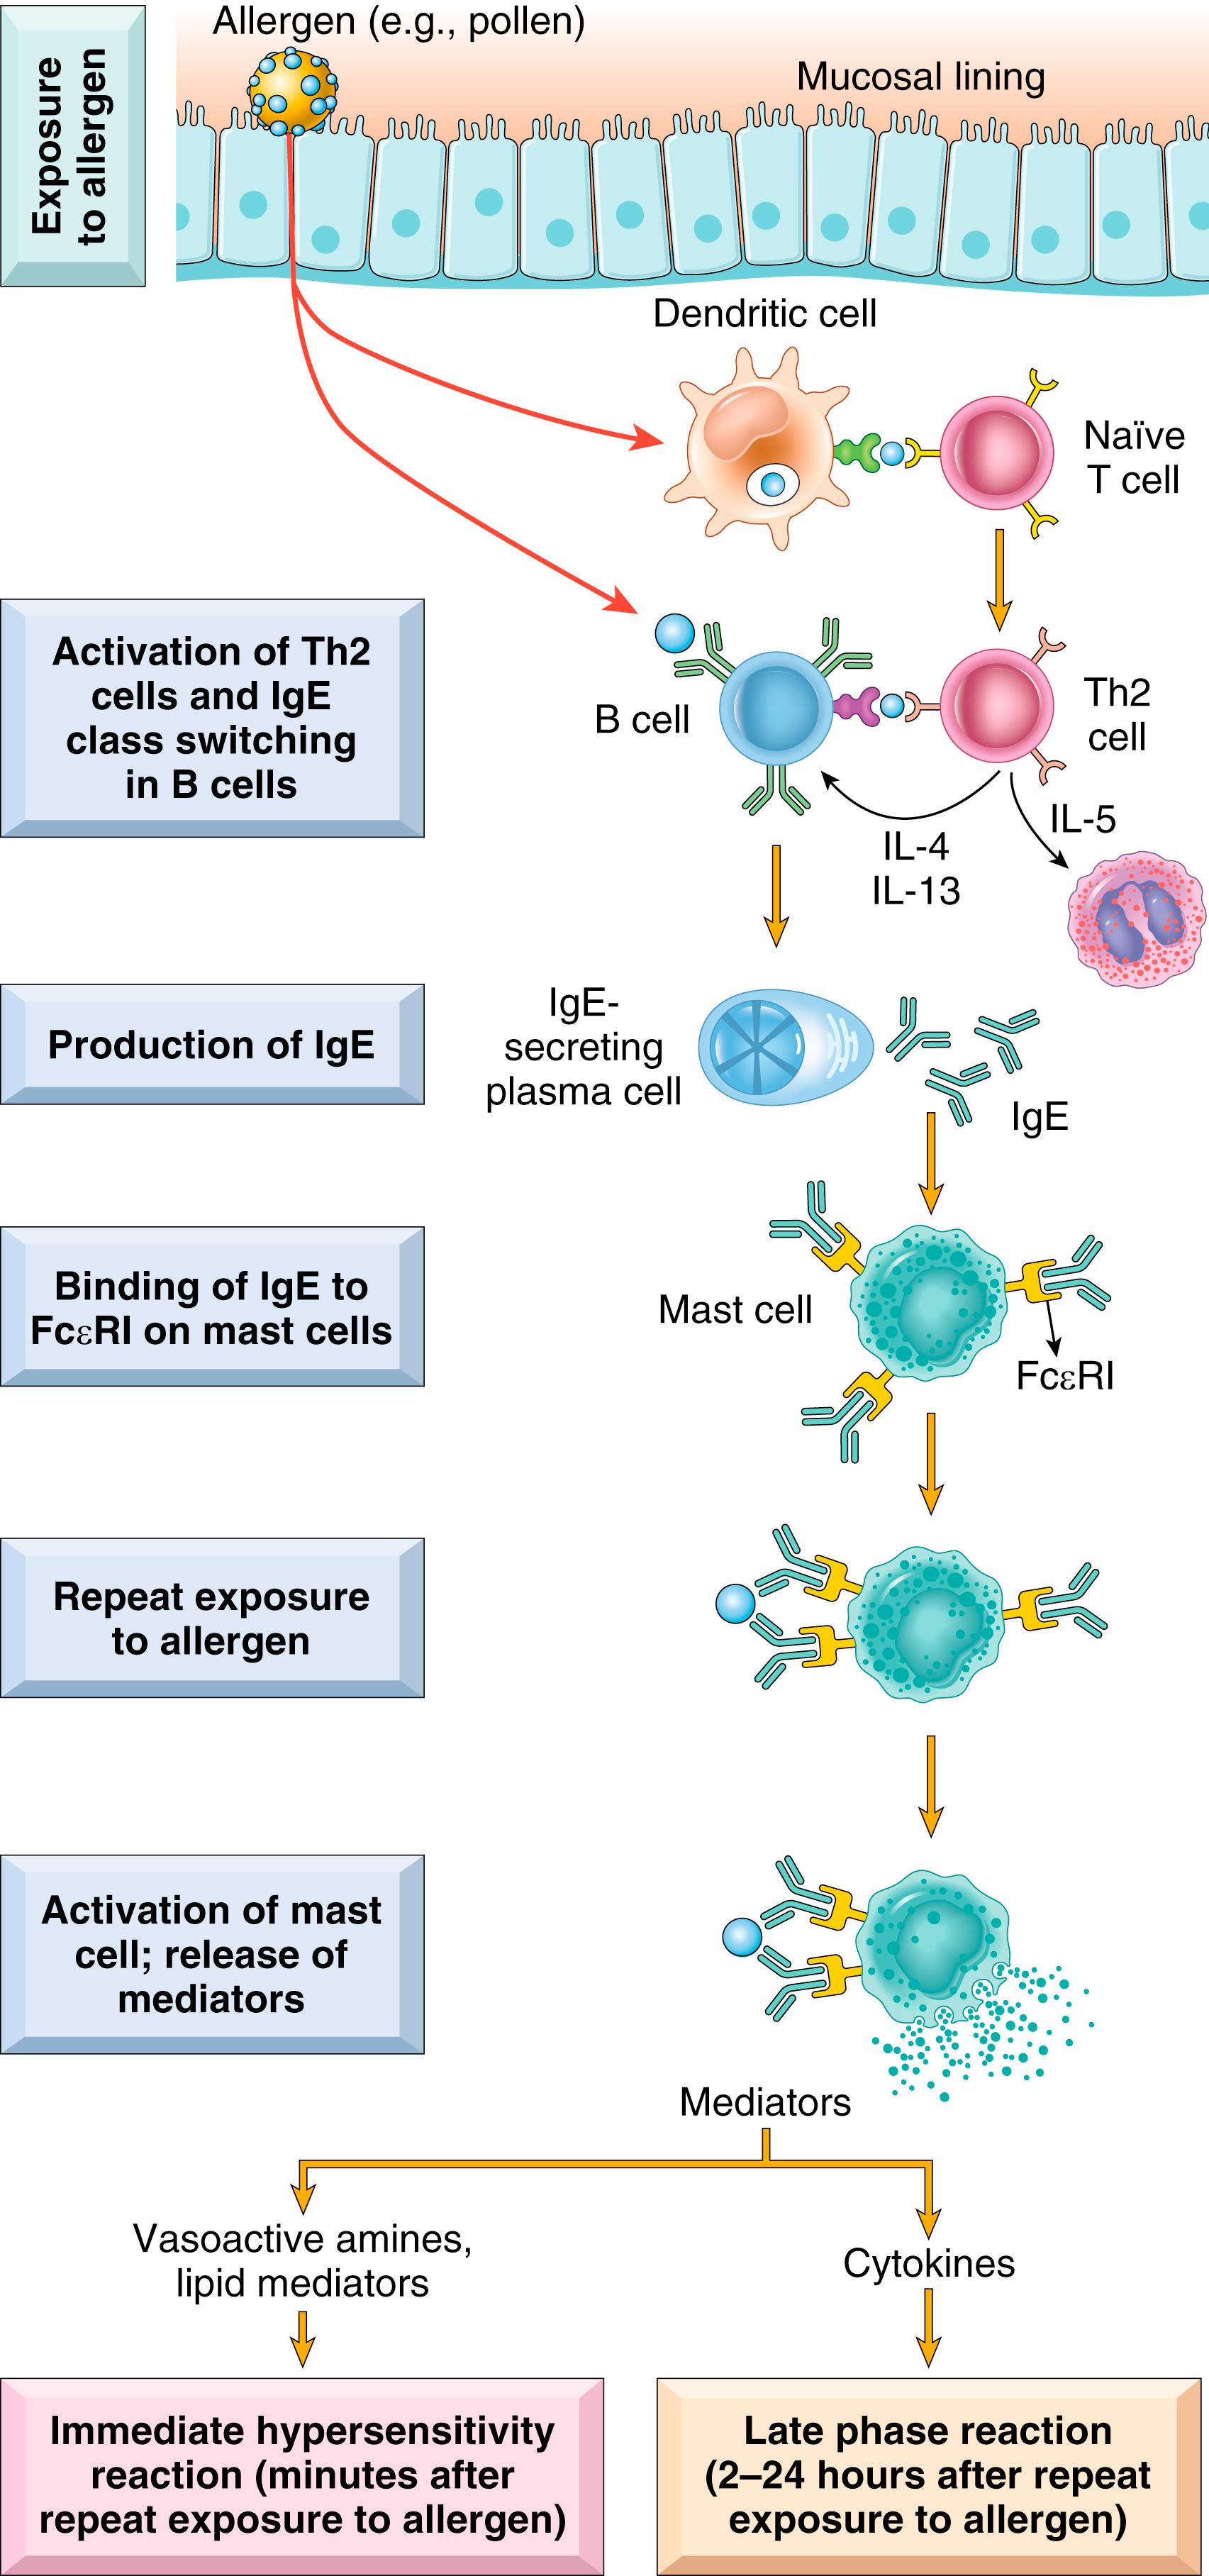 FIG. 5.10, Sequence of events in immediate (type I) hypersensitivity. Immediate hypersensitivity reactions are initiated by the introduction of an allergen, which stimulates Th2 responses and IgE production in genetically susceptible individuals. IgE binds to Fc receptors (FcεRI) on mast cells, and subsequent exposure to the allergen activates the mast cells to secrete the mediators that are responsible for the pathologic manifestations of immediate hypersensitivity.